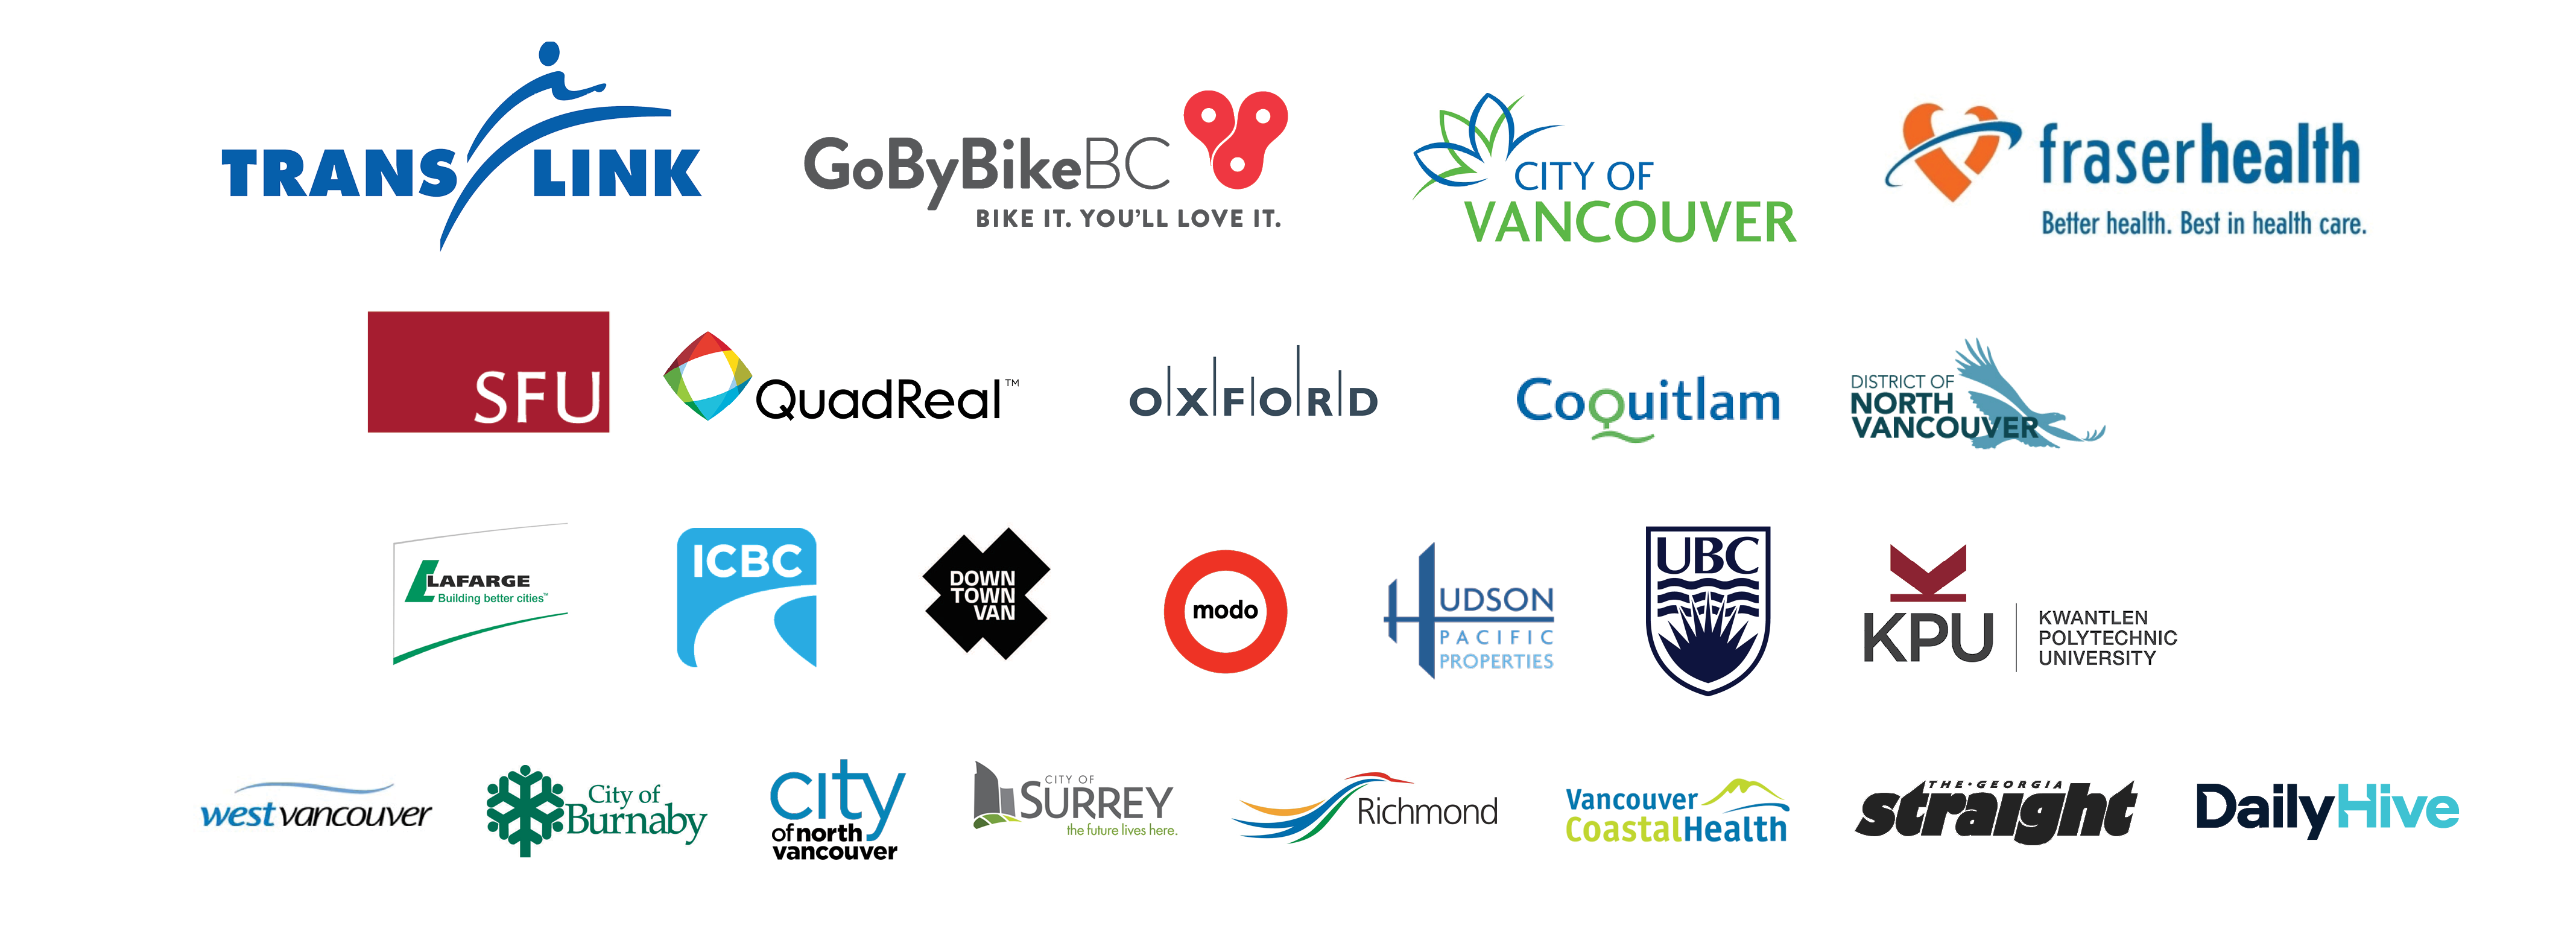 A slurry of 2023 Fall Go by Bike Weeks sponsor logos. Sponsors include TransLink, GoByBikeBC Society, City of Vancouver, Fraser Health, SFU, QuadReal, Oxford Properties, City of Coquitlam, District of North Vancouver, Lafarge Canada, ICBC, Downtown Vancouver BIA, Modo, Hudson Pacific Properties, UBC, KPU, District of West Vancouver, City of Burnaby, City of North Vancouver, City of Surrey, City of Richmond, Vancouver Coastal Health, Georgia Straight, and Daily Hive Vancouver.